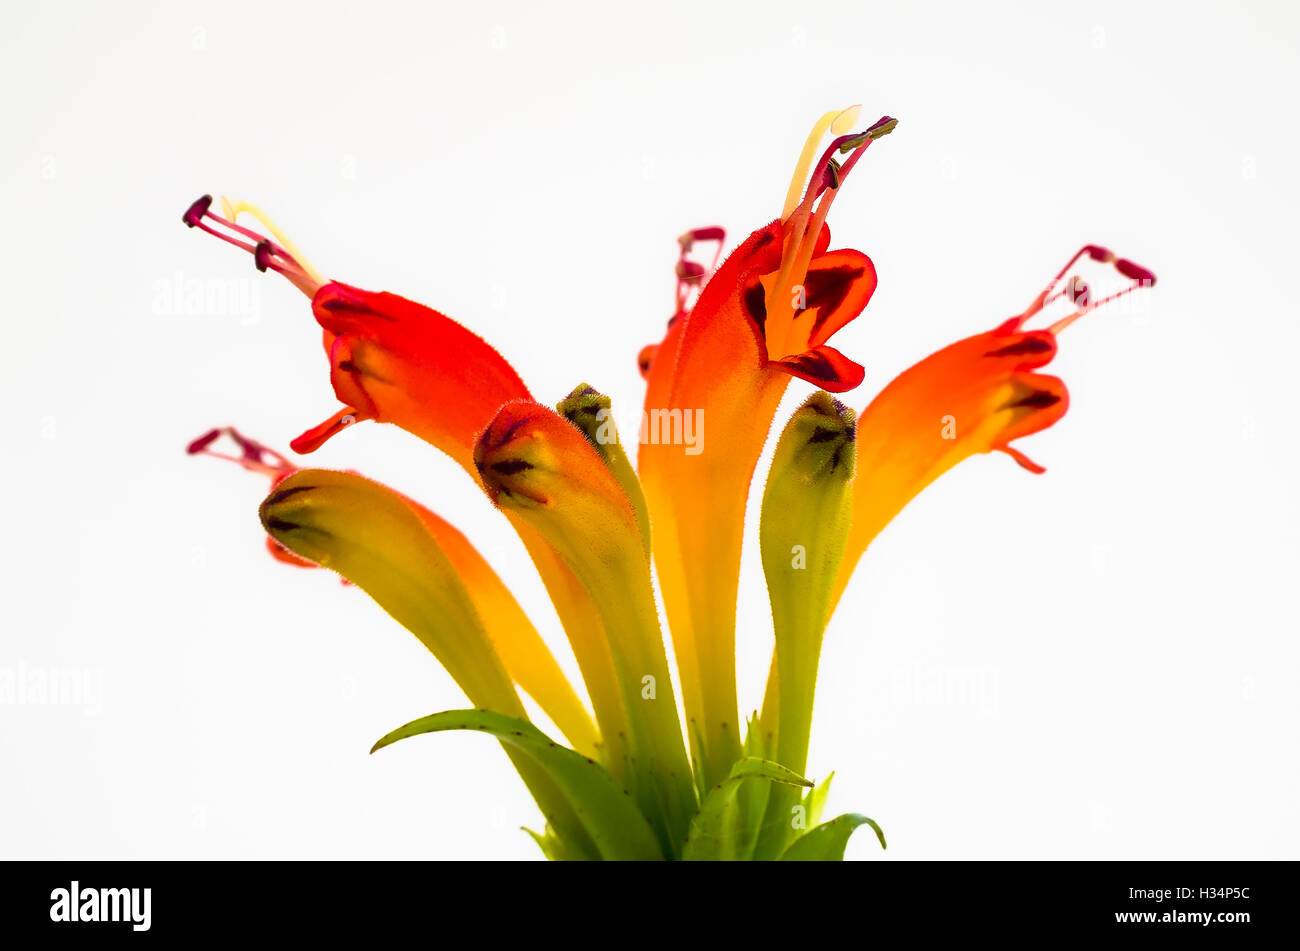 Tubular flowers of Aeschynanthus an indoor plant in UK Stock Photo